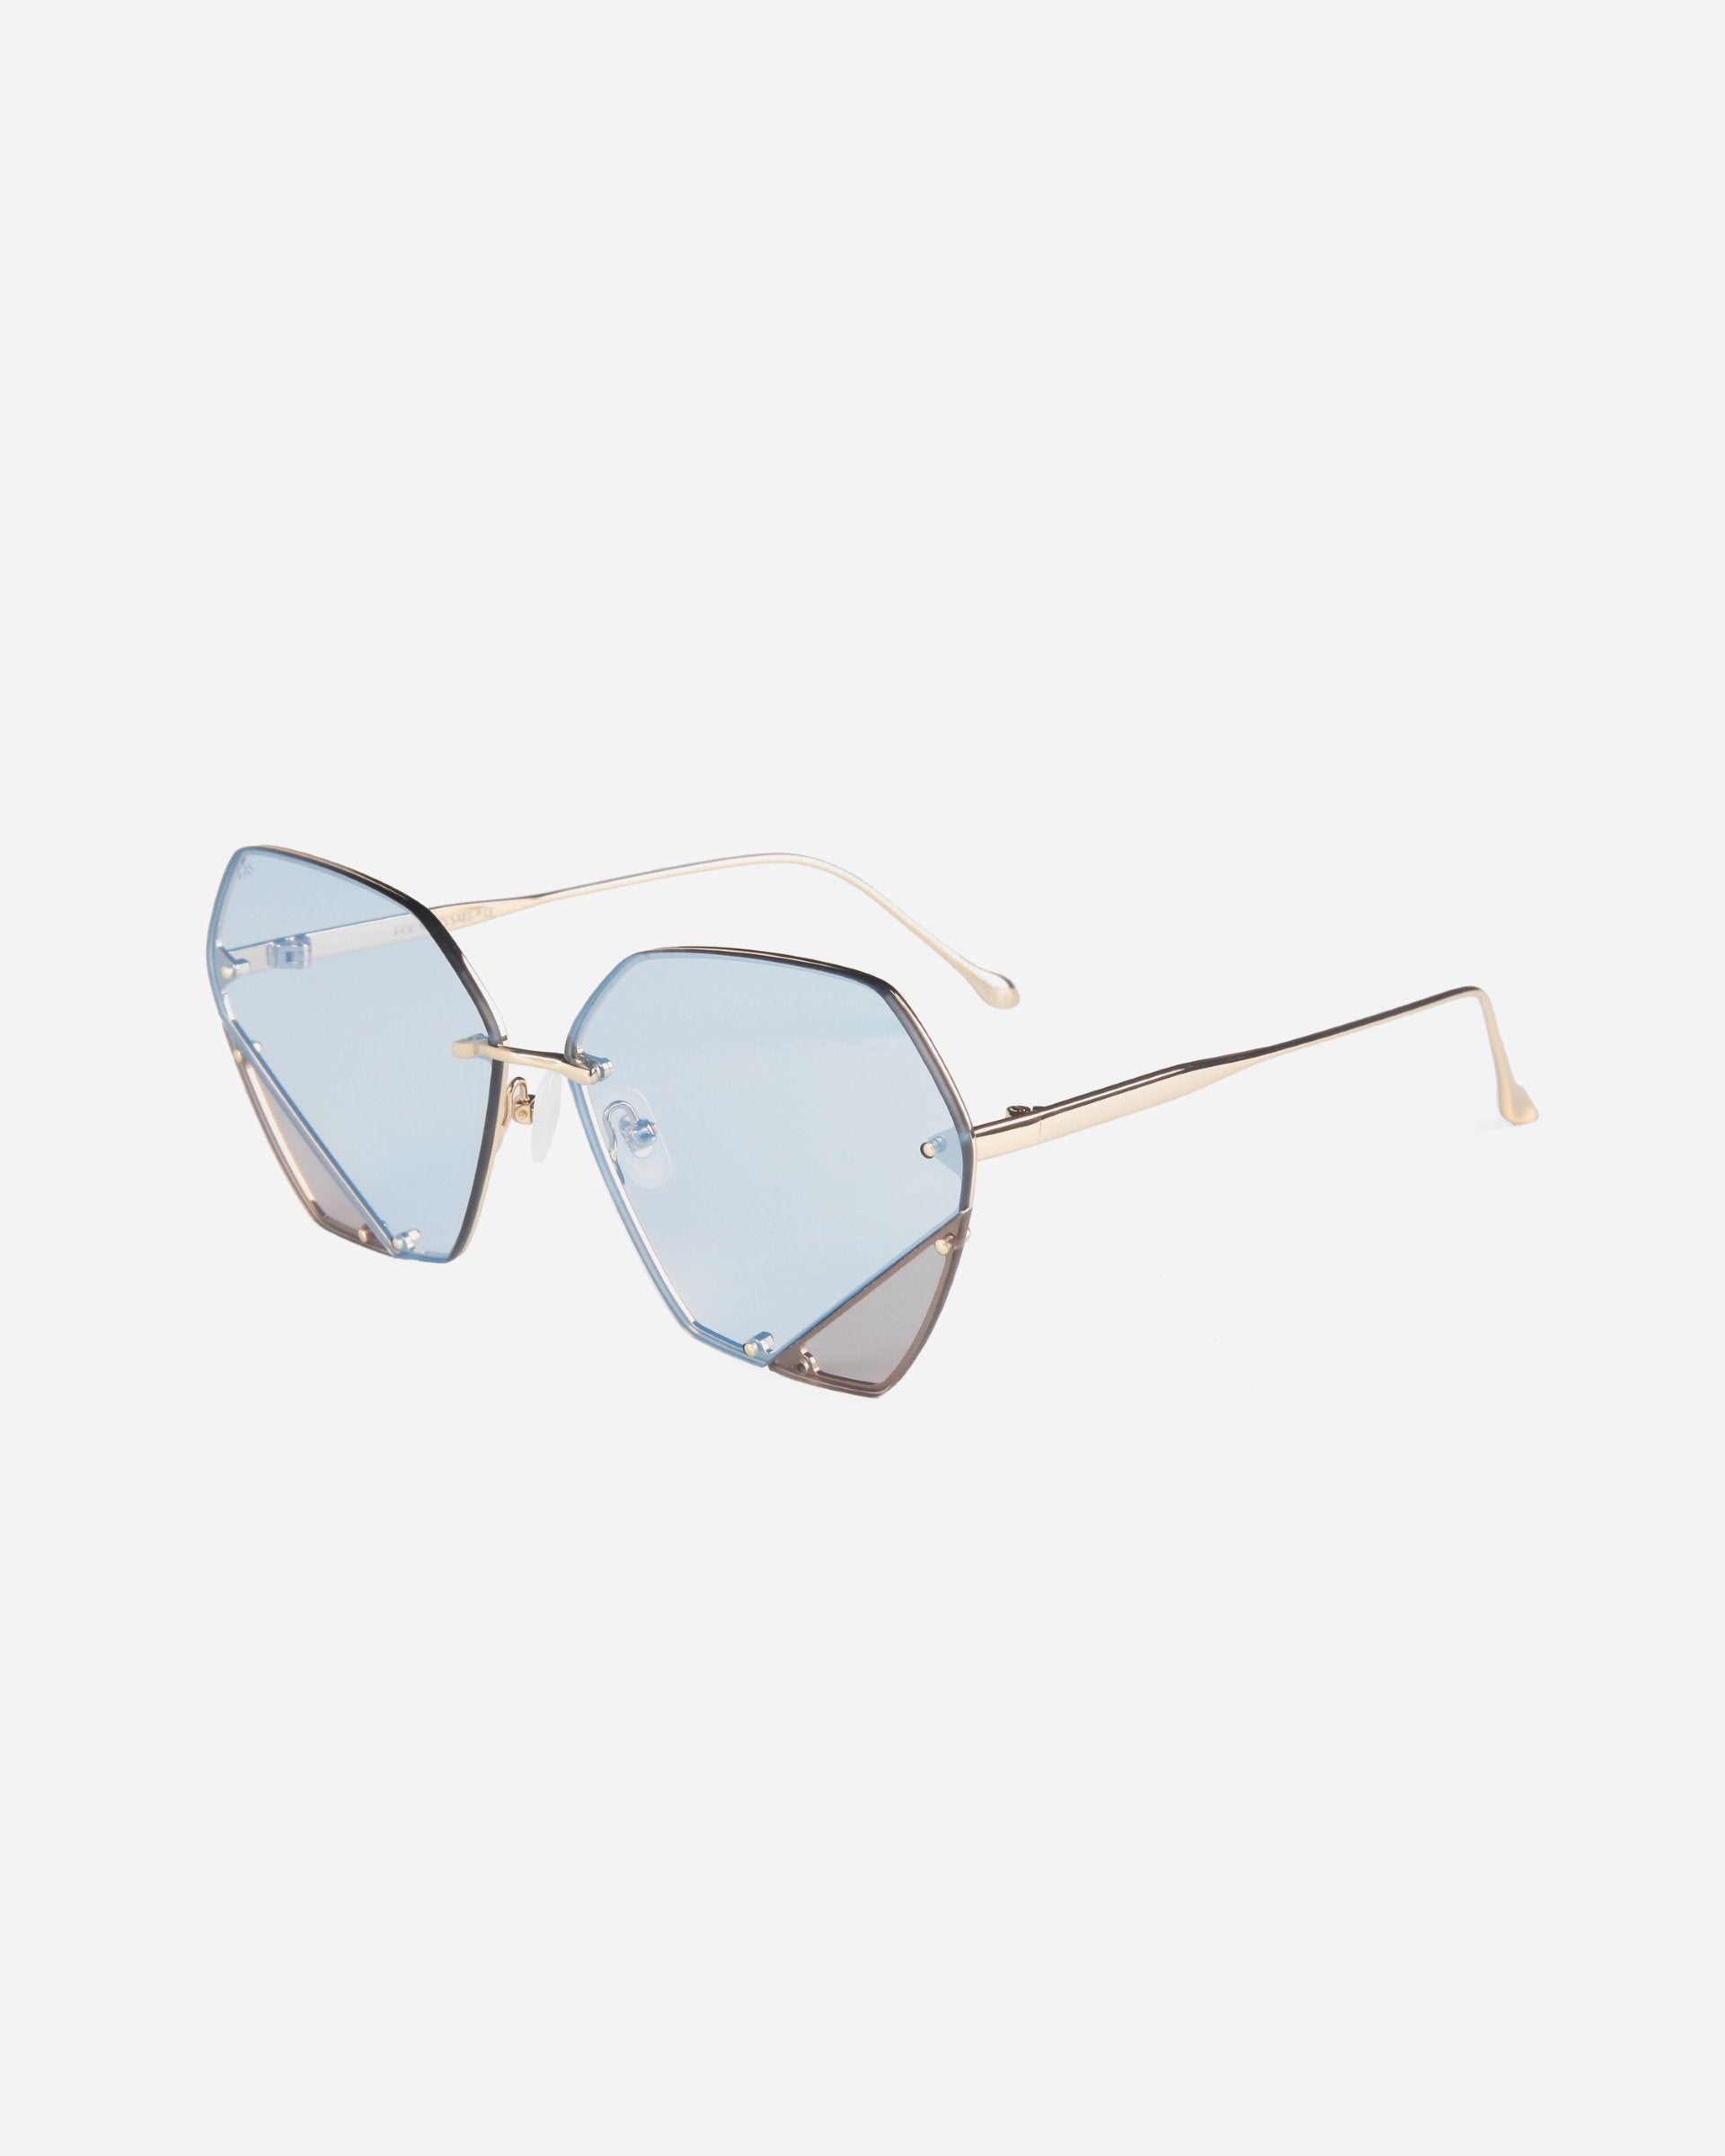 A stylish pair of For Art&#39;s Sake® Icy sunglasses featuring geometric, light blue-tinted lenses and thin, gold metal frames with jadestone nosepads, set against a plain white background.